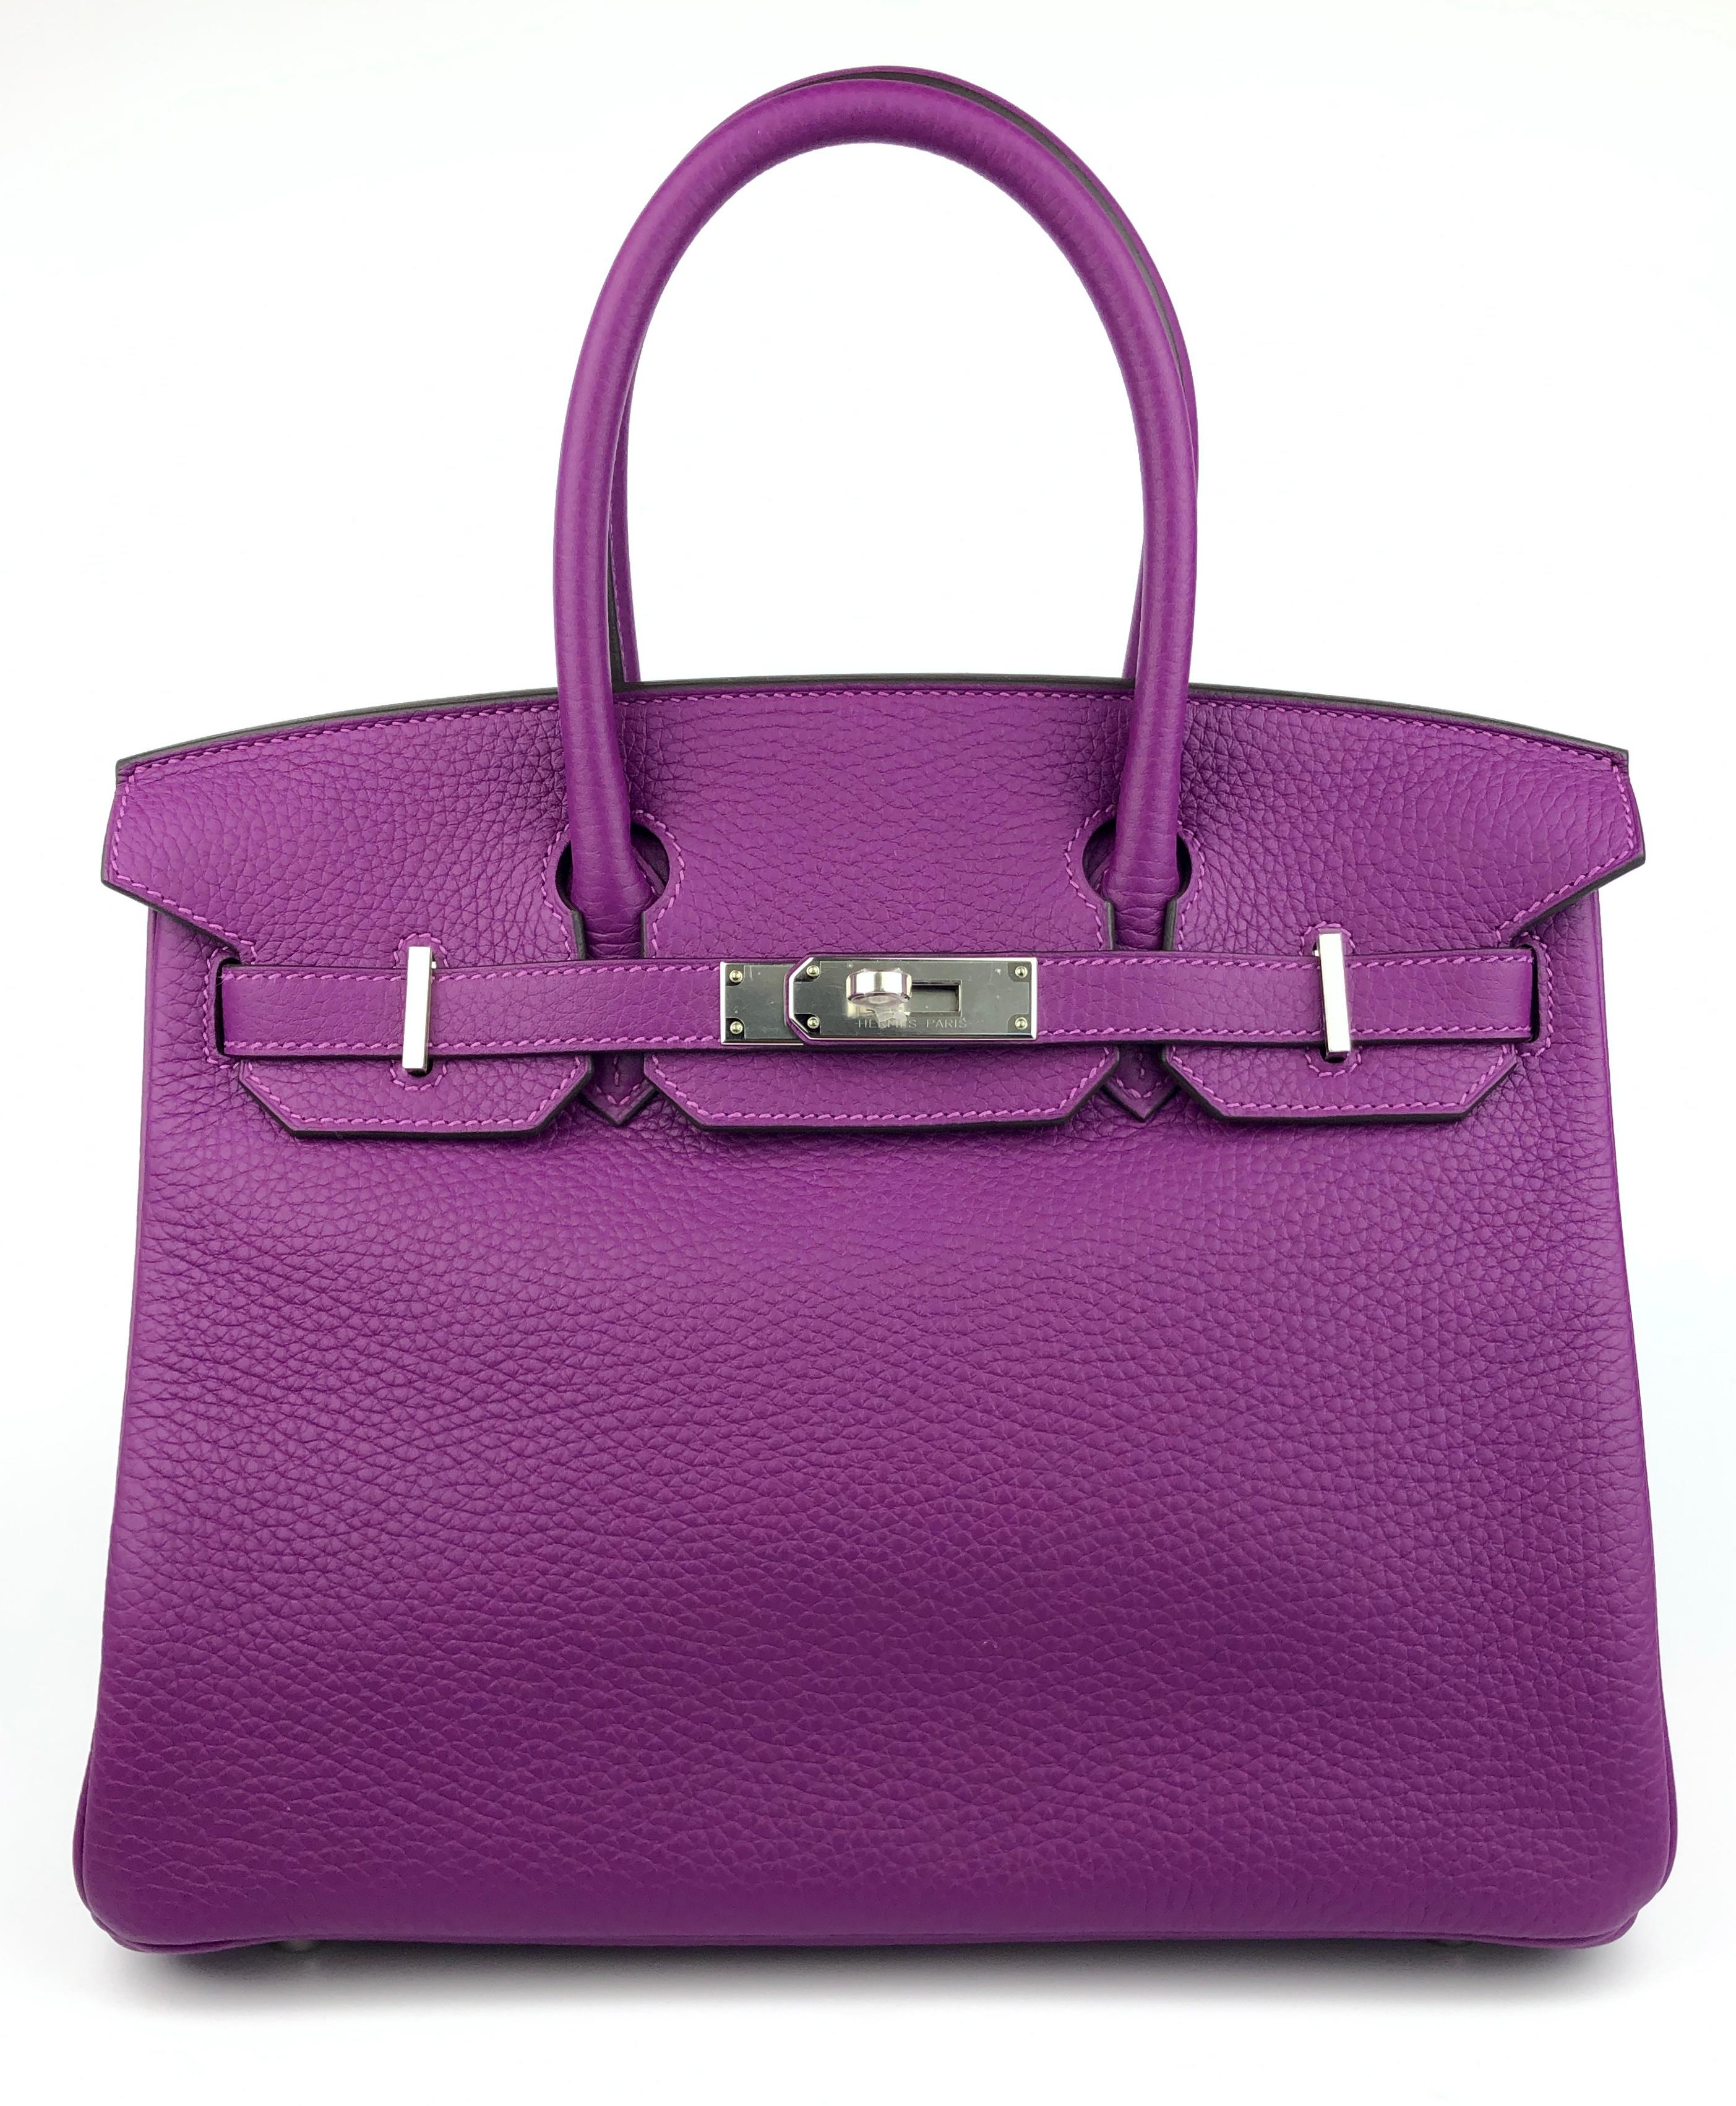 Rare NEW 2021 Hermes Birkin 30 Anemone Purple Leather Palladium Hardware . Z Stamp 2021. As New with all accessories and Box.

Shop with Confidence from Lux Addicts. Authenticity Guaranteed!

Lux Addicts is a Premier Luxury Dealer and one of the